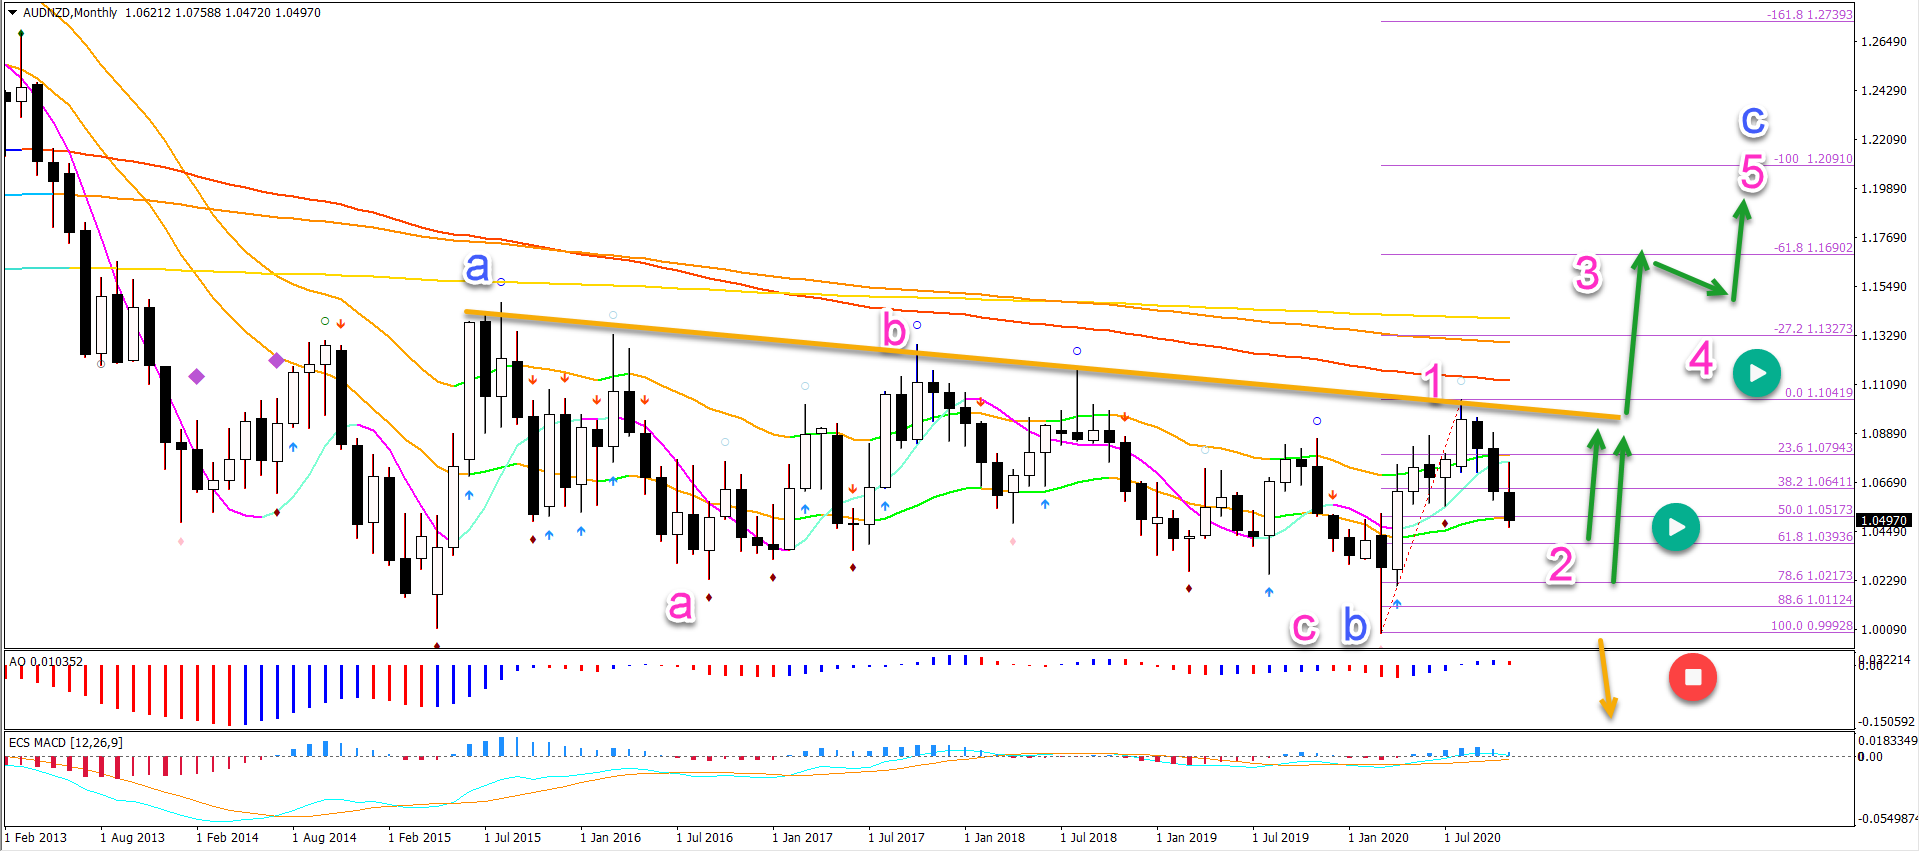 AUD/NZD Monthly chart 30.11.20